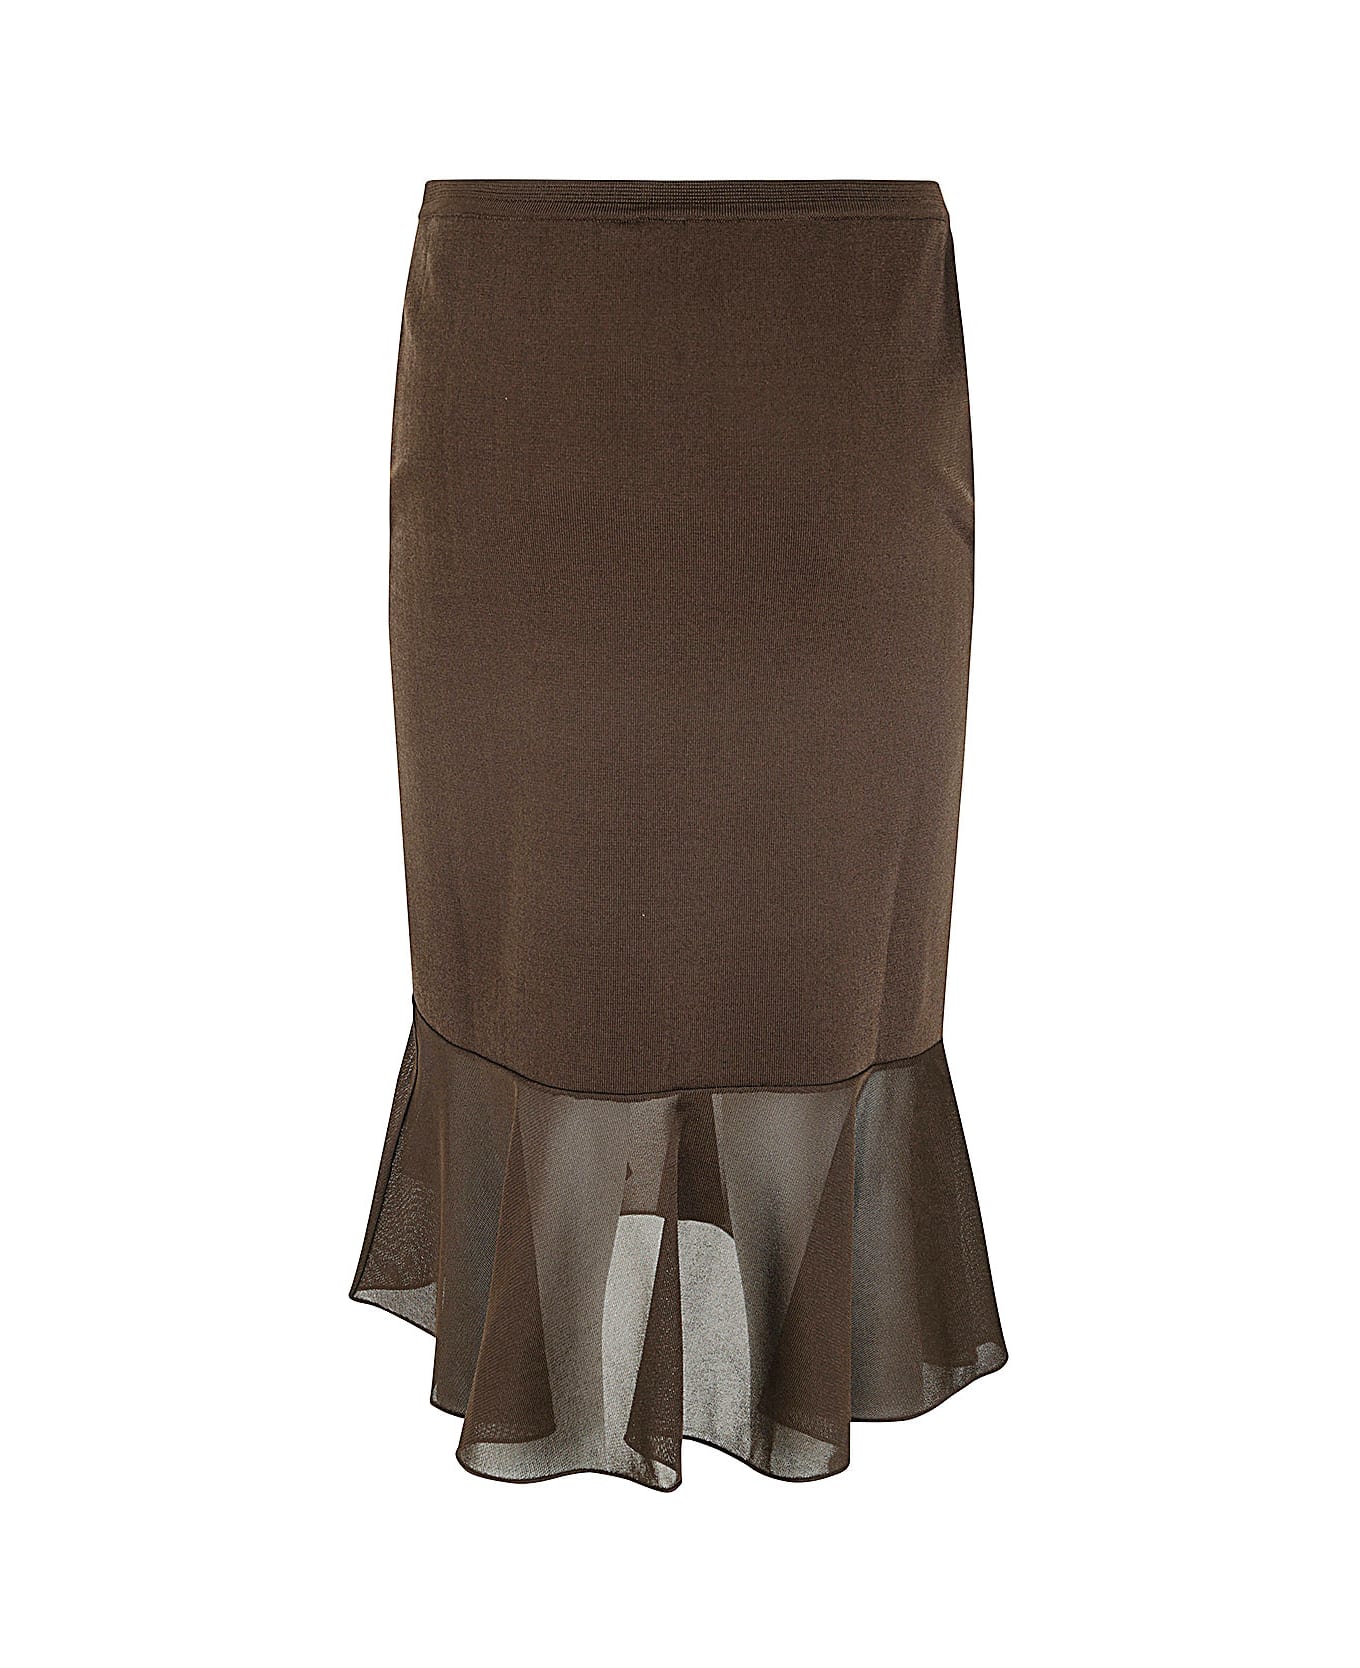 Tom Ford Knitted Skirt - Chocolate Brown